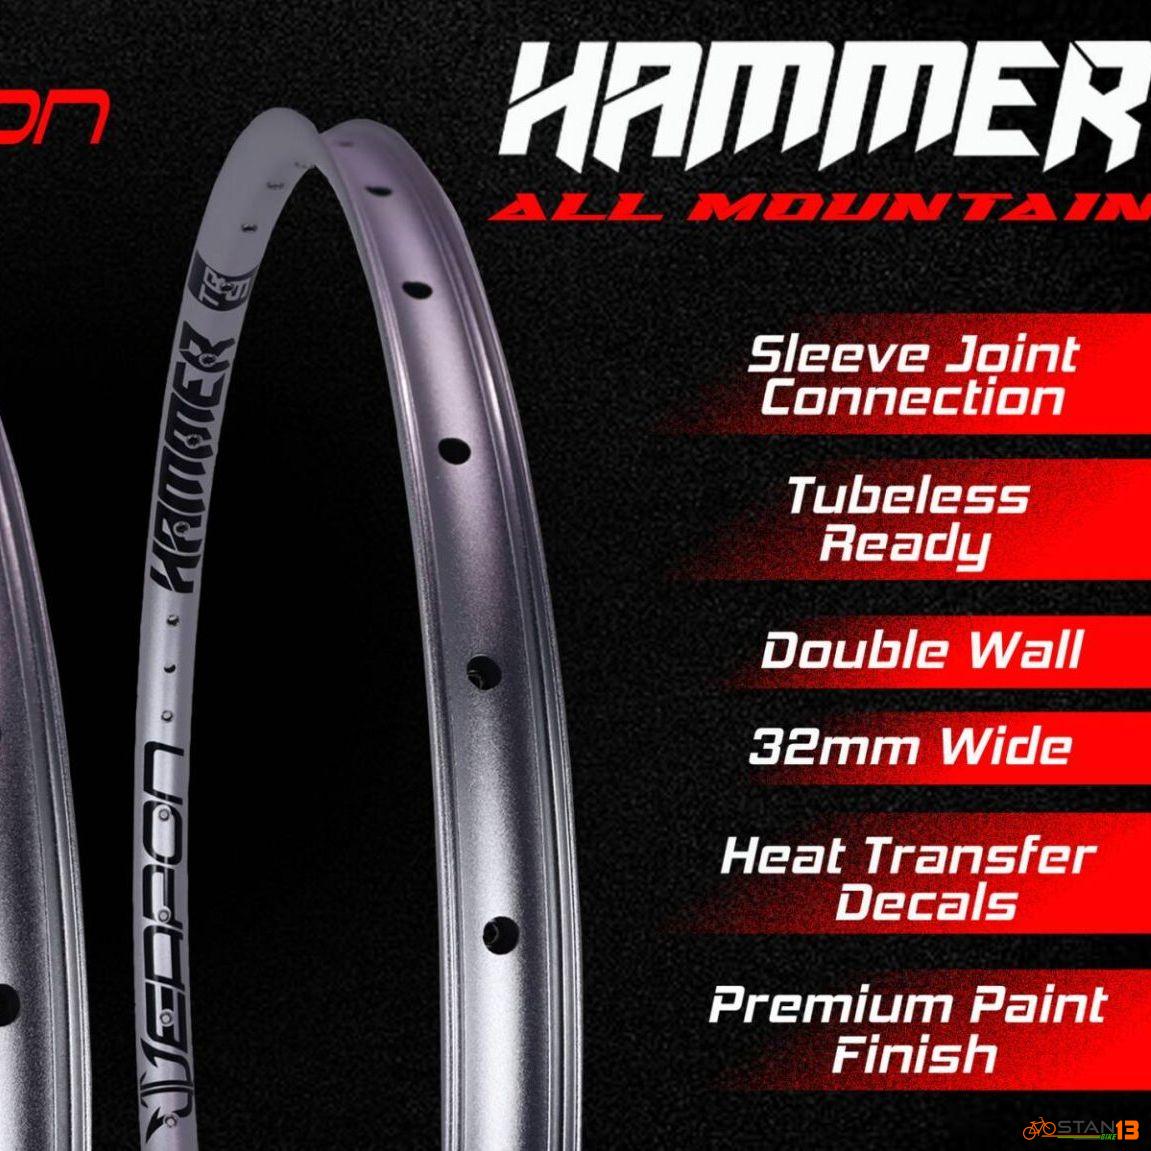 Rim Weapon Hammer TR7 for 27.5 and Hammer TR9 for 29er ALL MOUNTAIN ENDURO RIMS